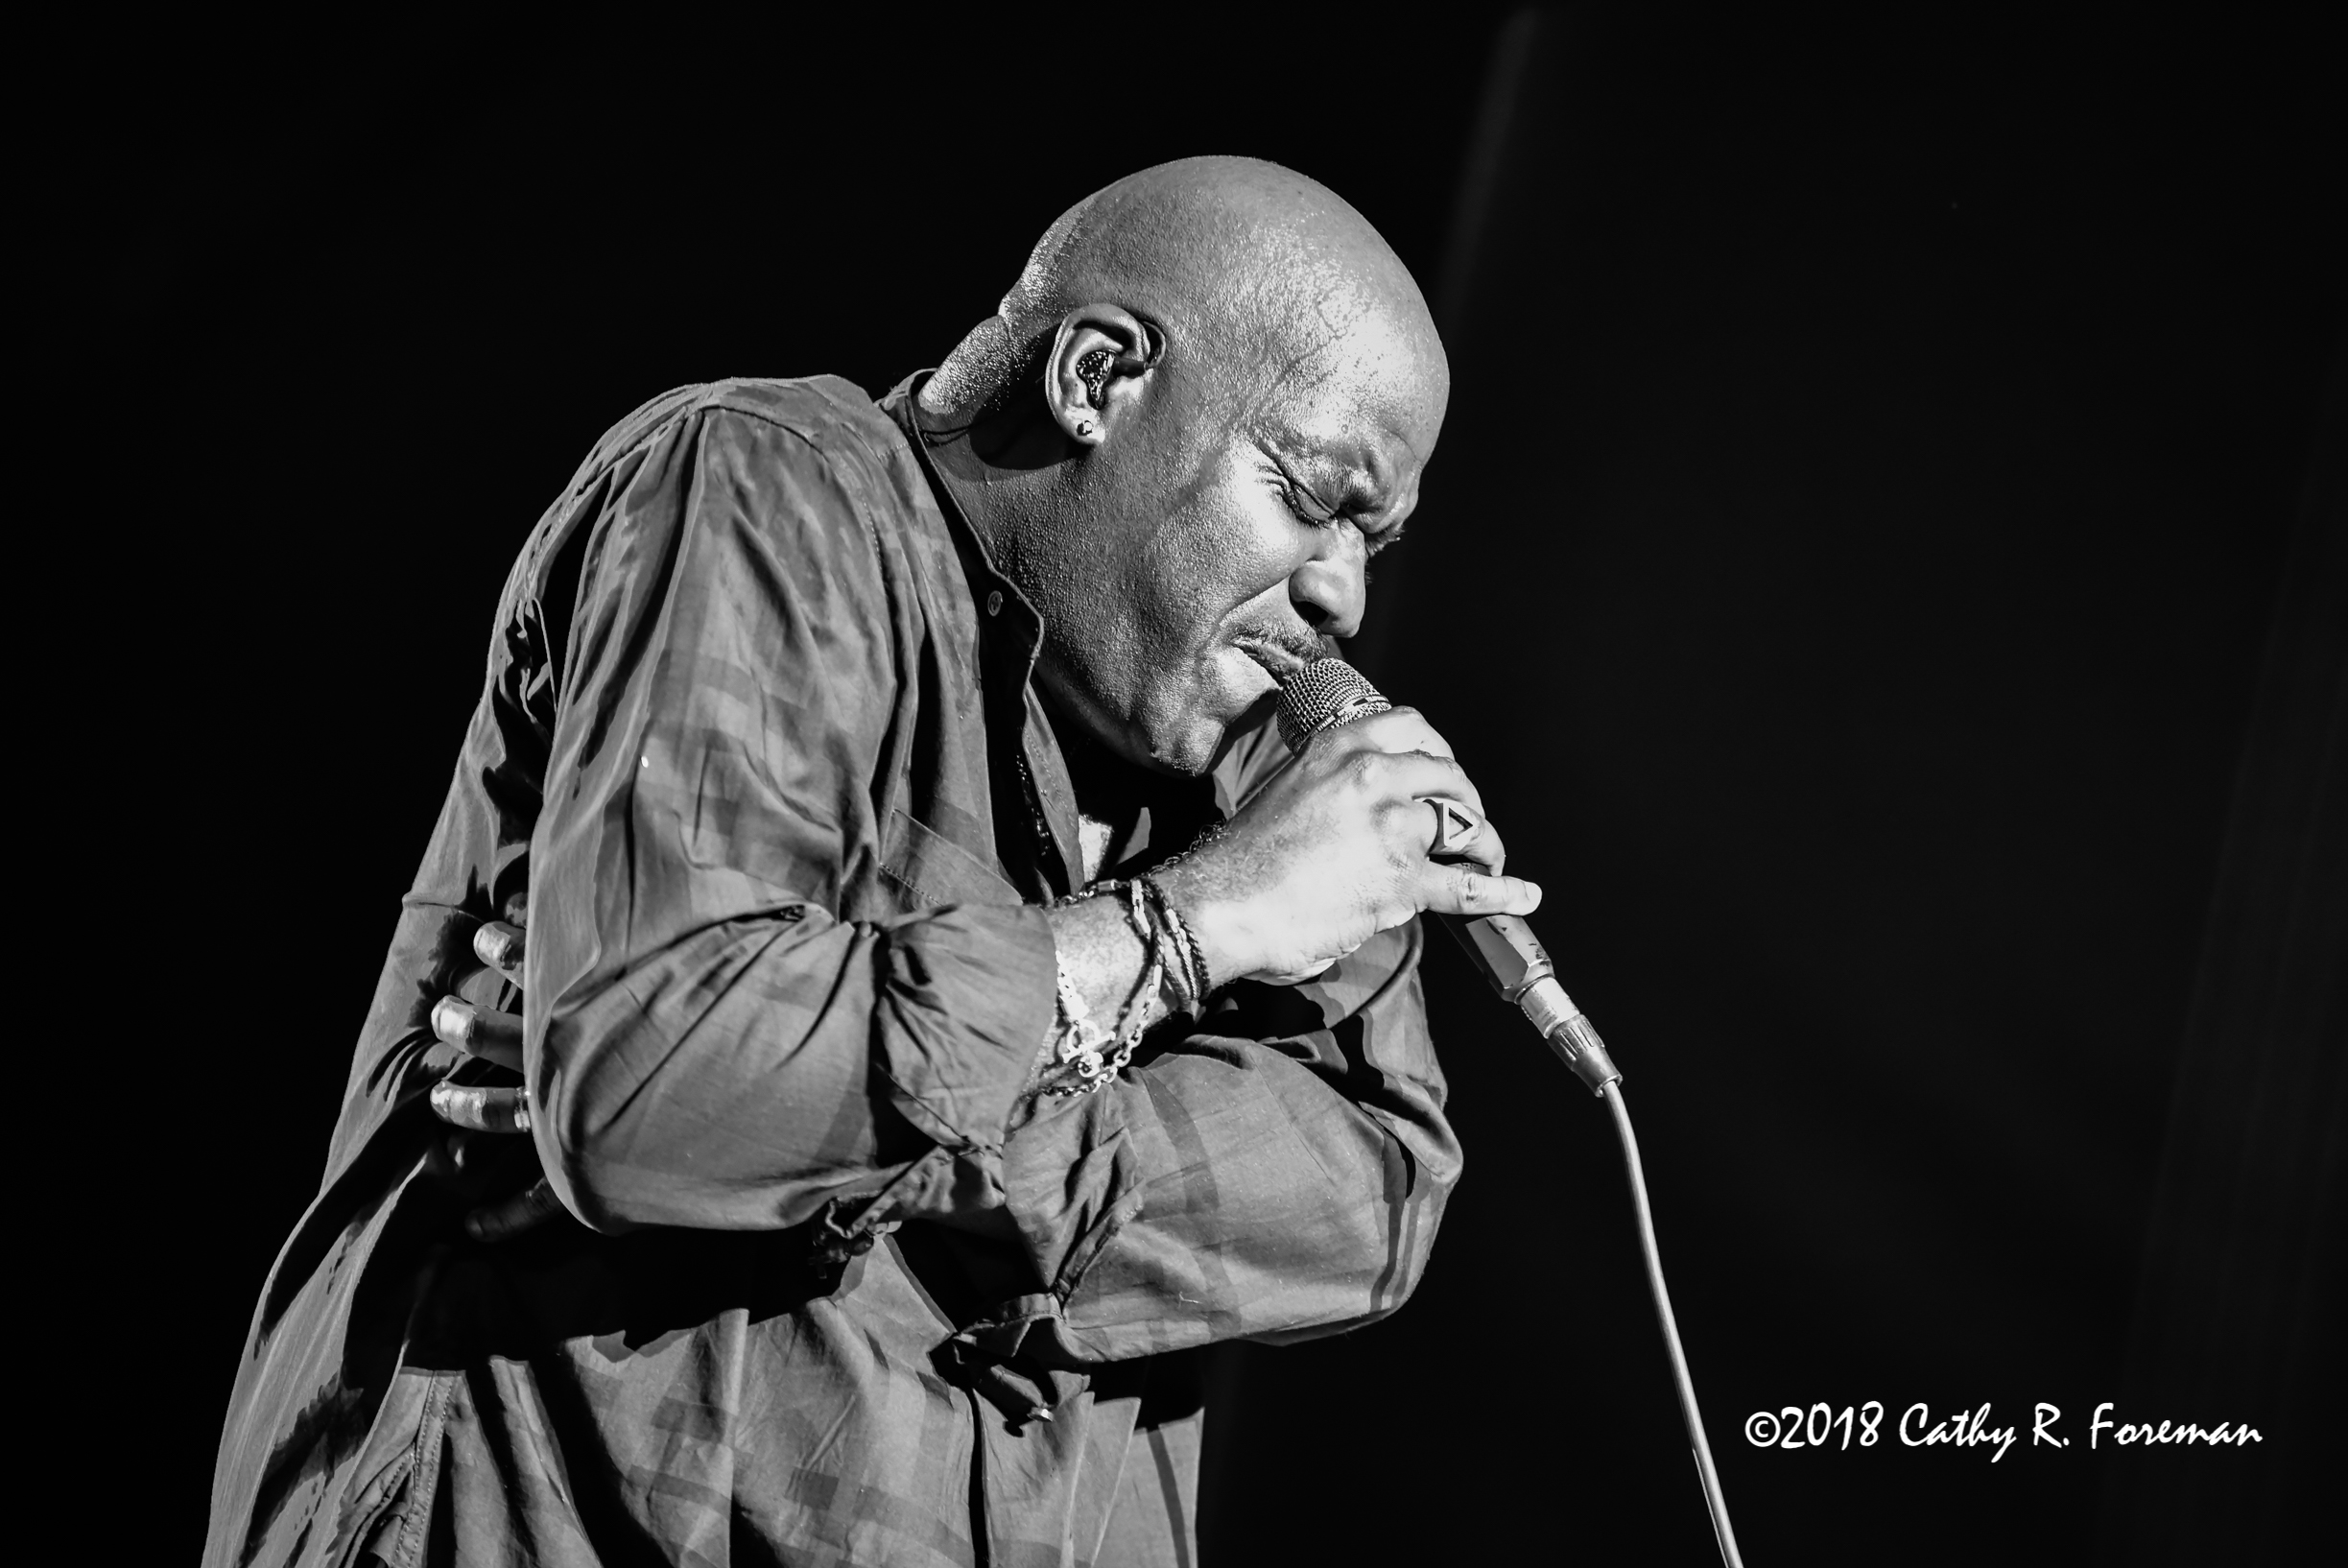 (c) 2018 Will Downing by Cathy R. Foreman